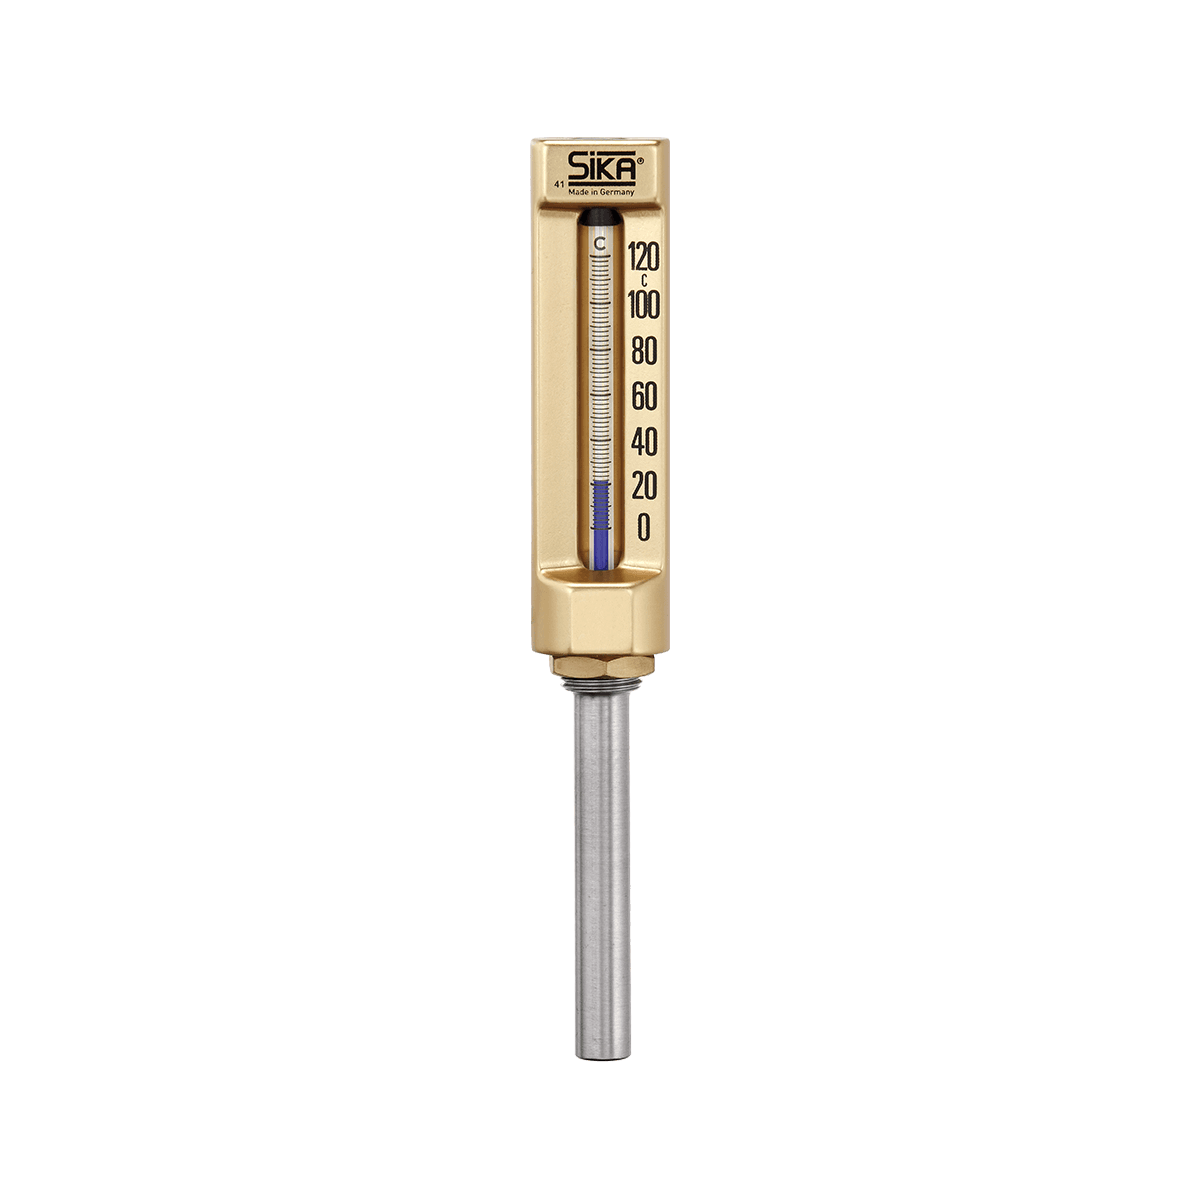 https://www.sika.net/fileadmin/products/corporate/images/products/industrial_thermometers/Industrial_thermometer_174_district_heating.png